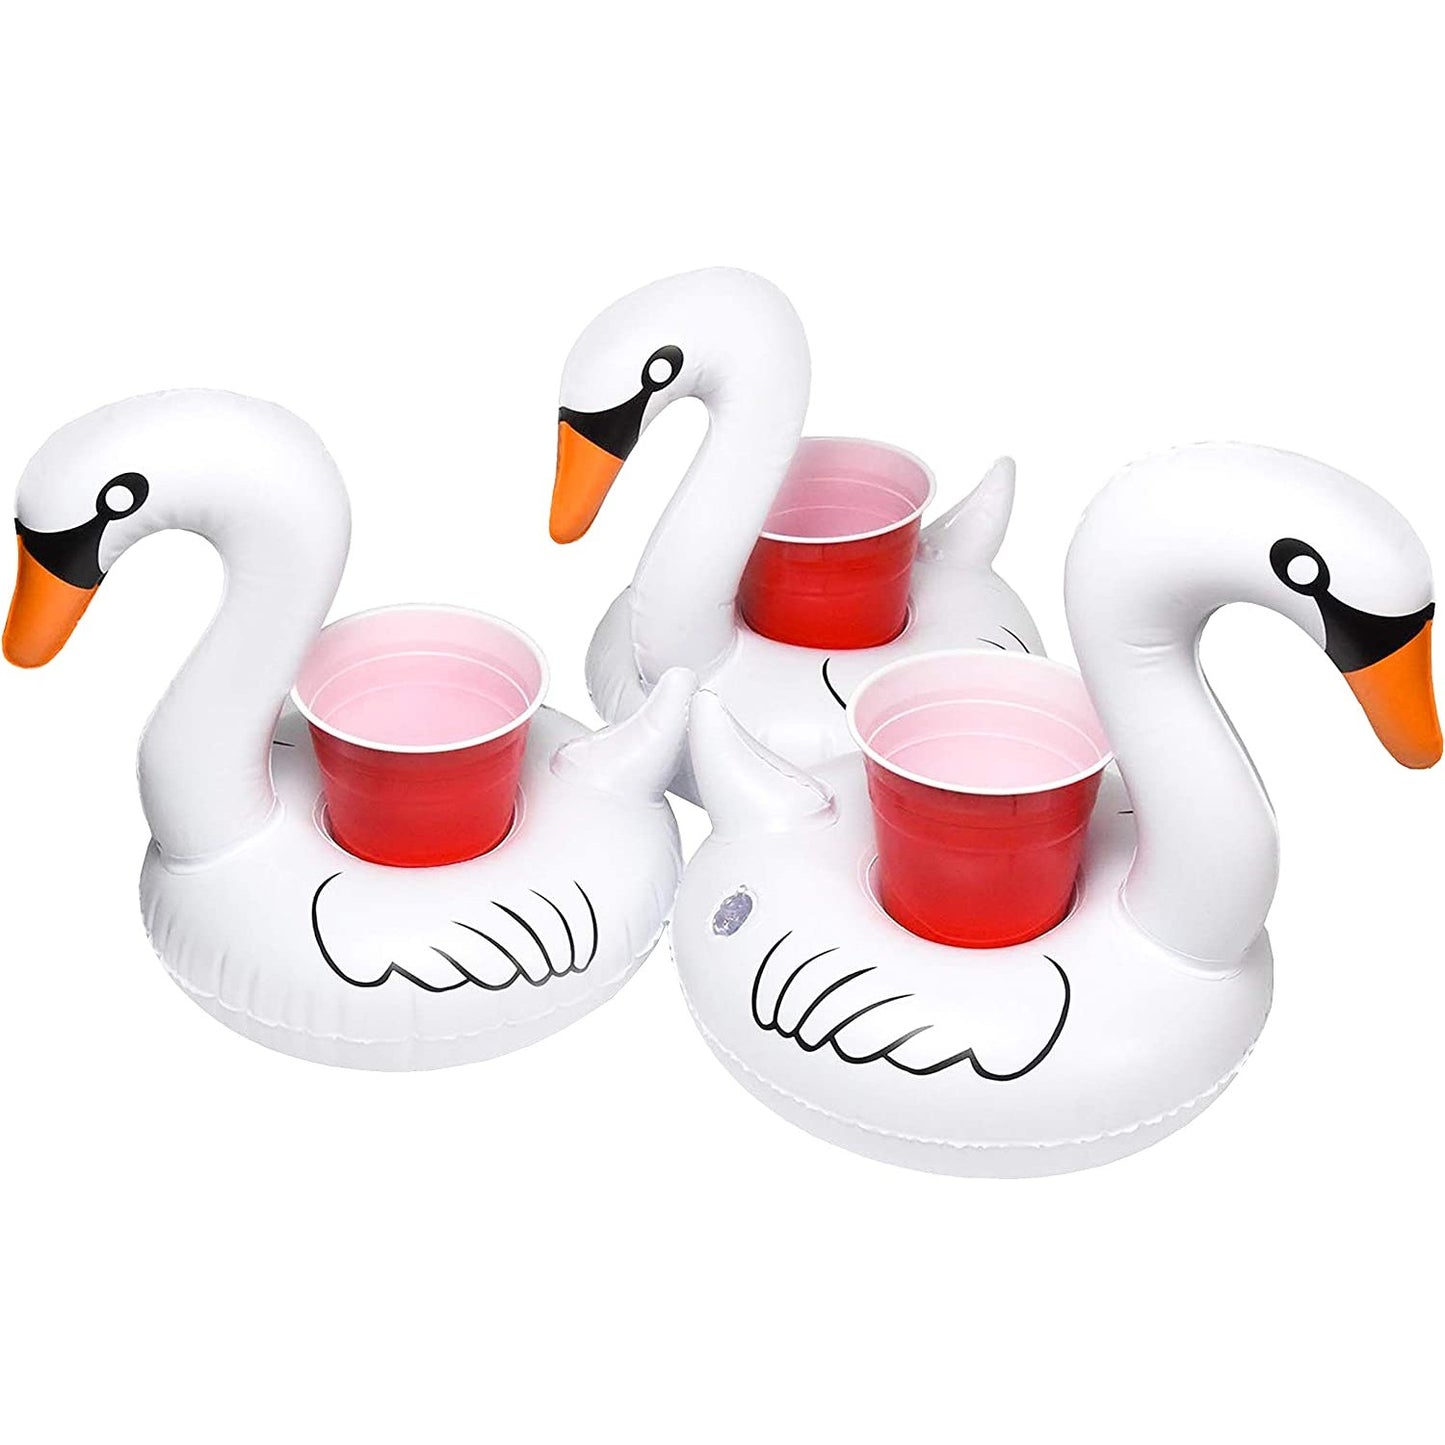 Three white swan-shaped drink floats with red cups in the holders.